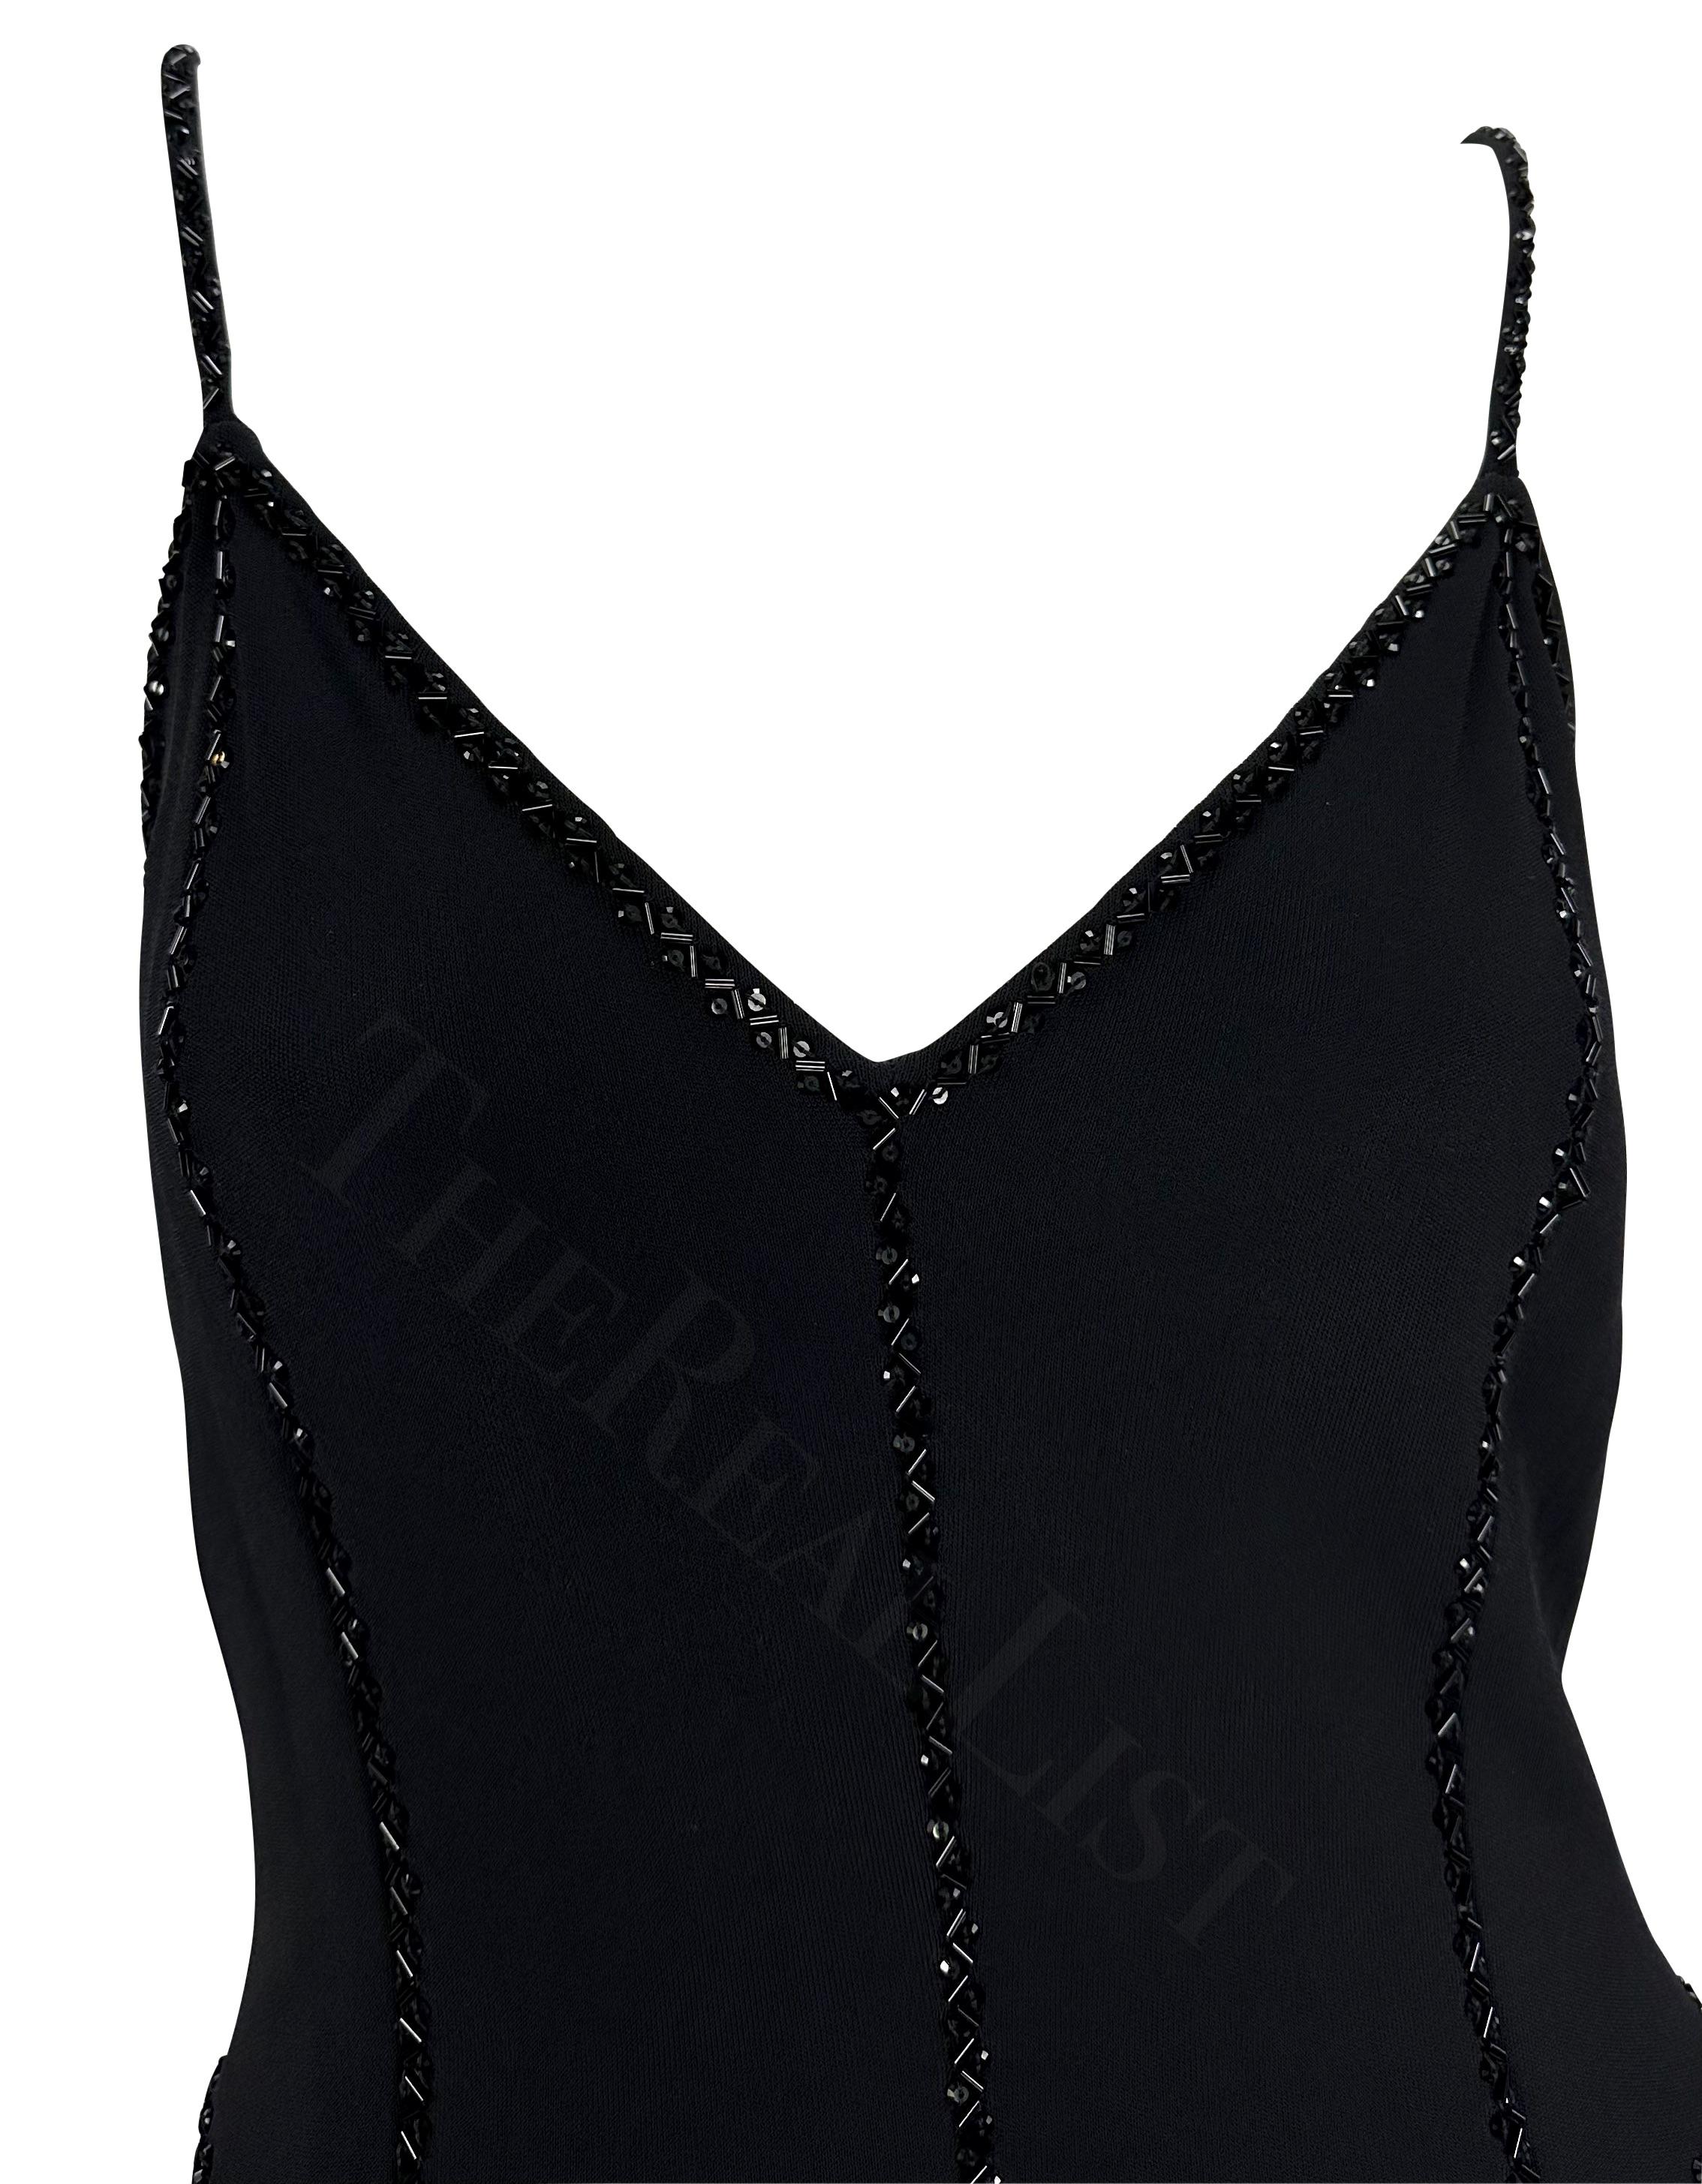 Presenting a fabulous black Giorgio Armani dress. From the 1990s this dress features a semi-exposed back, v-neckline, and spaghetti straps, and is made complete with black beaded details throughout. 

Approximate measurements:
Size - IT42/US8
Bust: